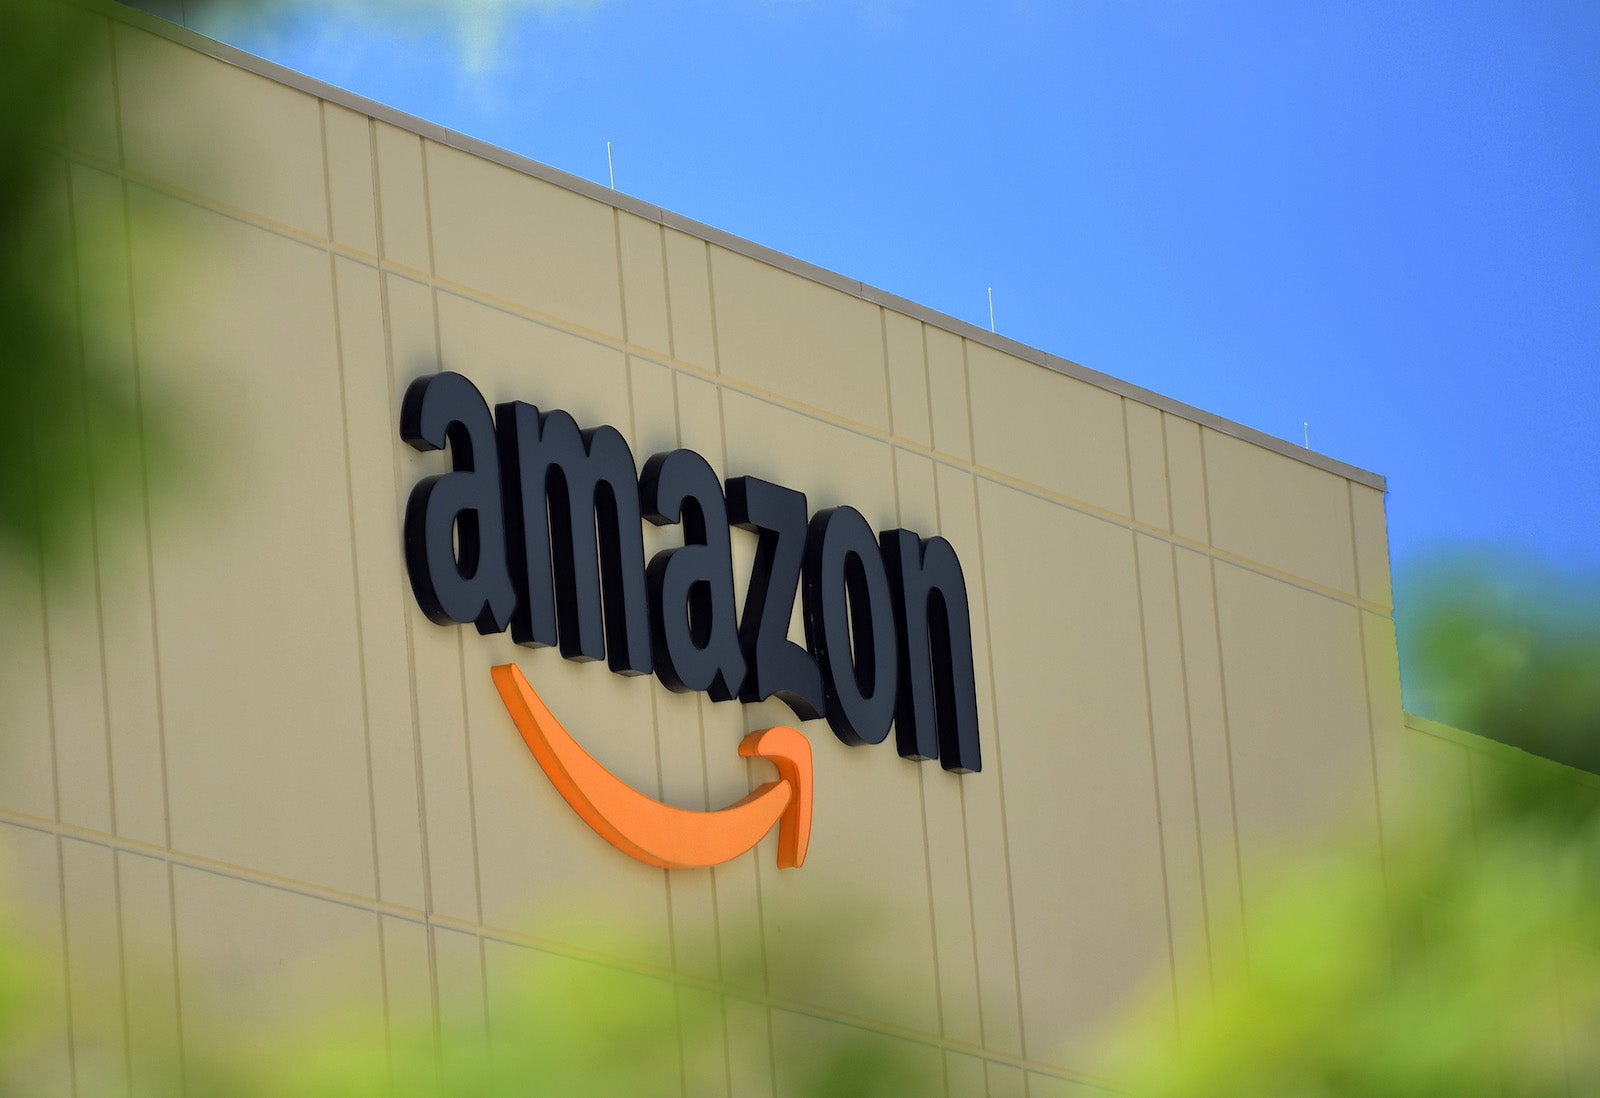 Amazon's Newest Robotics Fulfillment Center Holds Grand Opening In Orlando